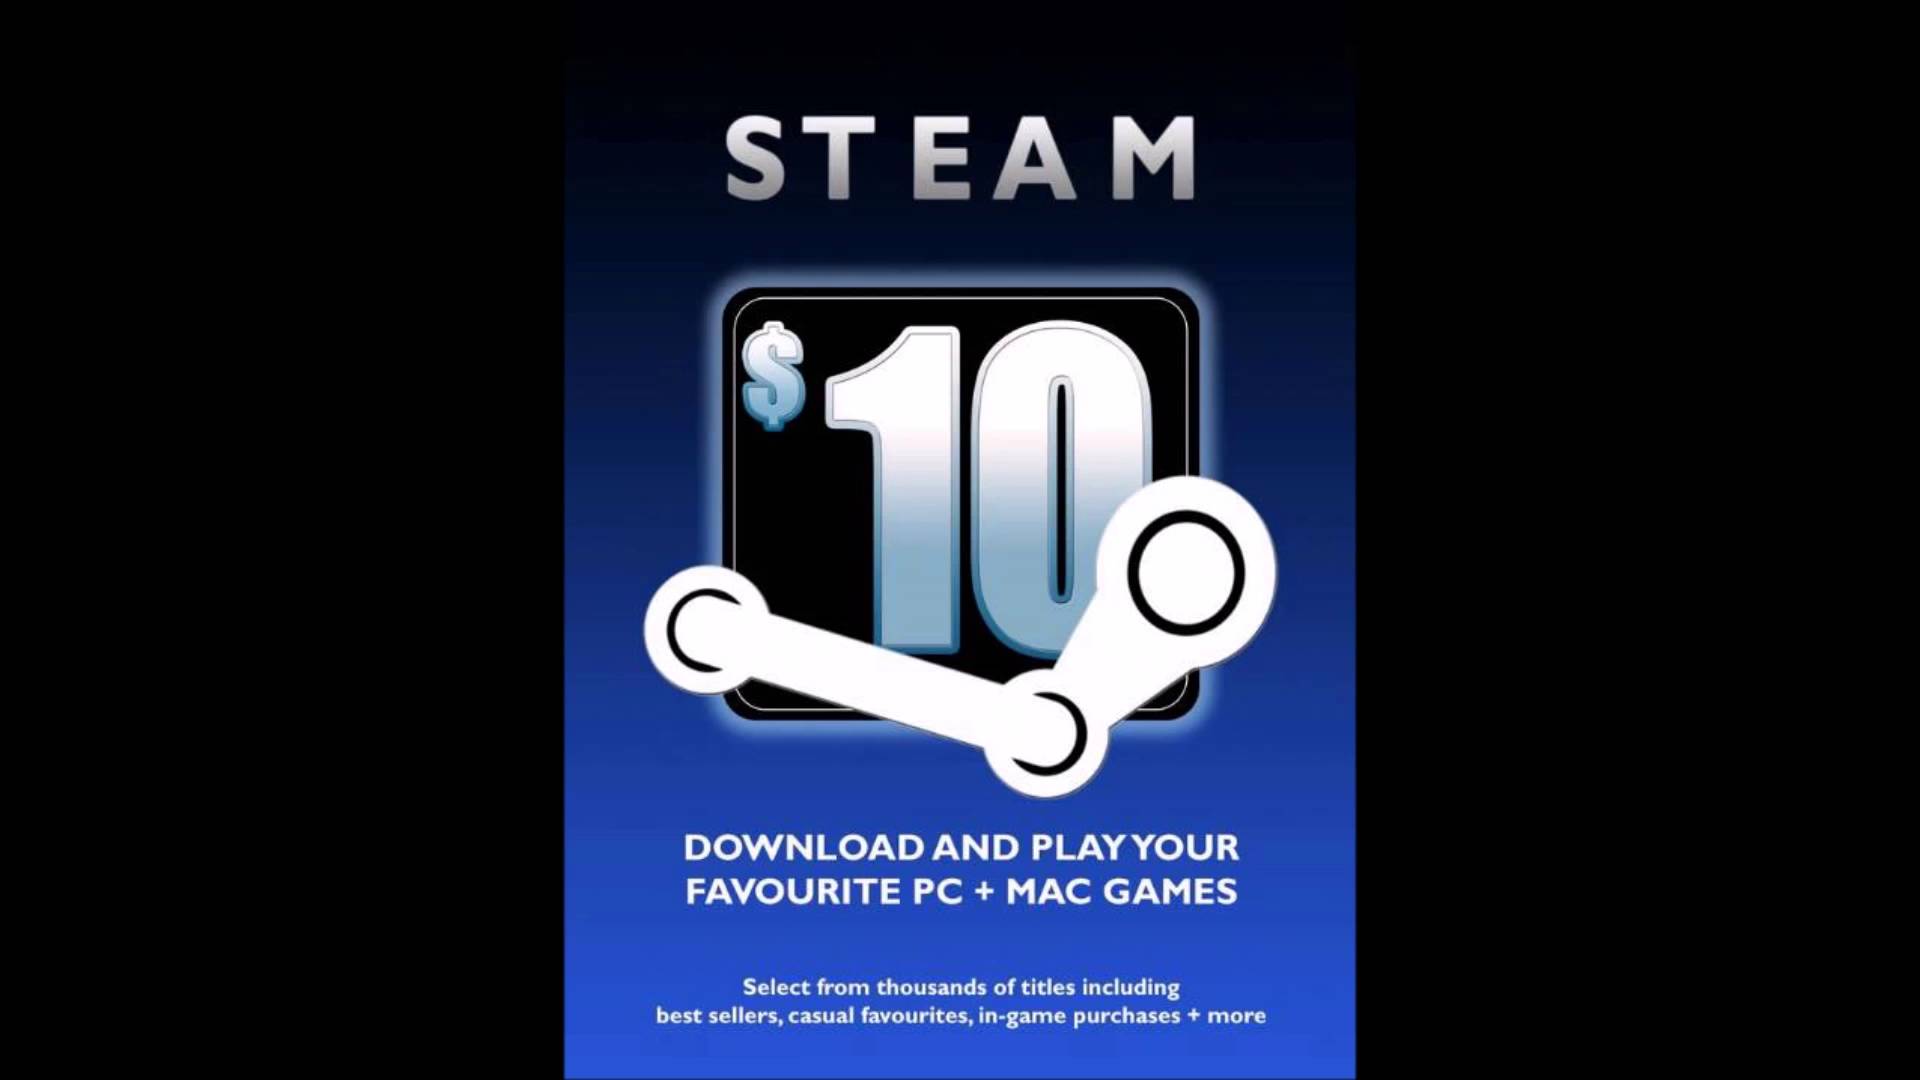 Buy all of steam фото 50